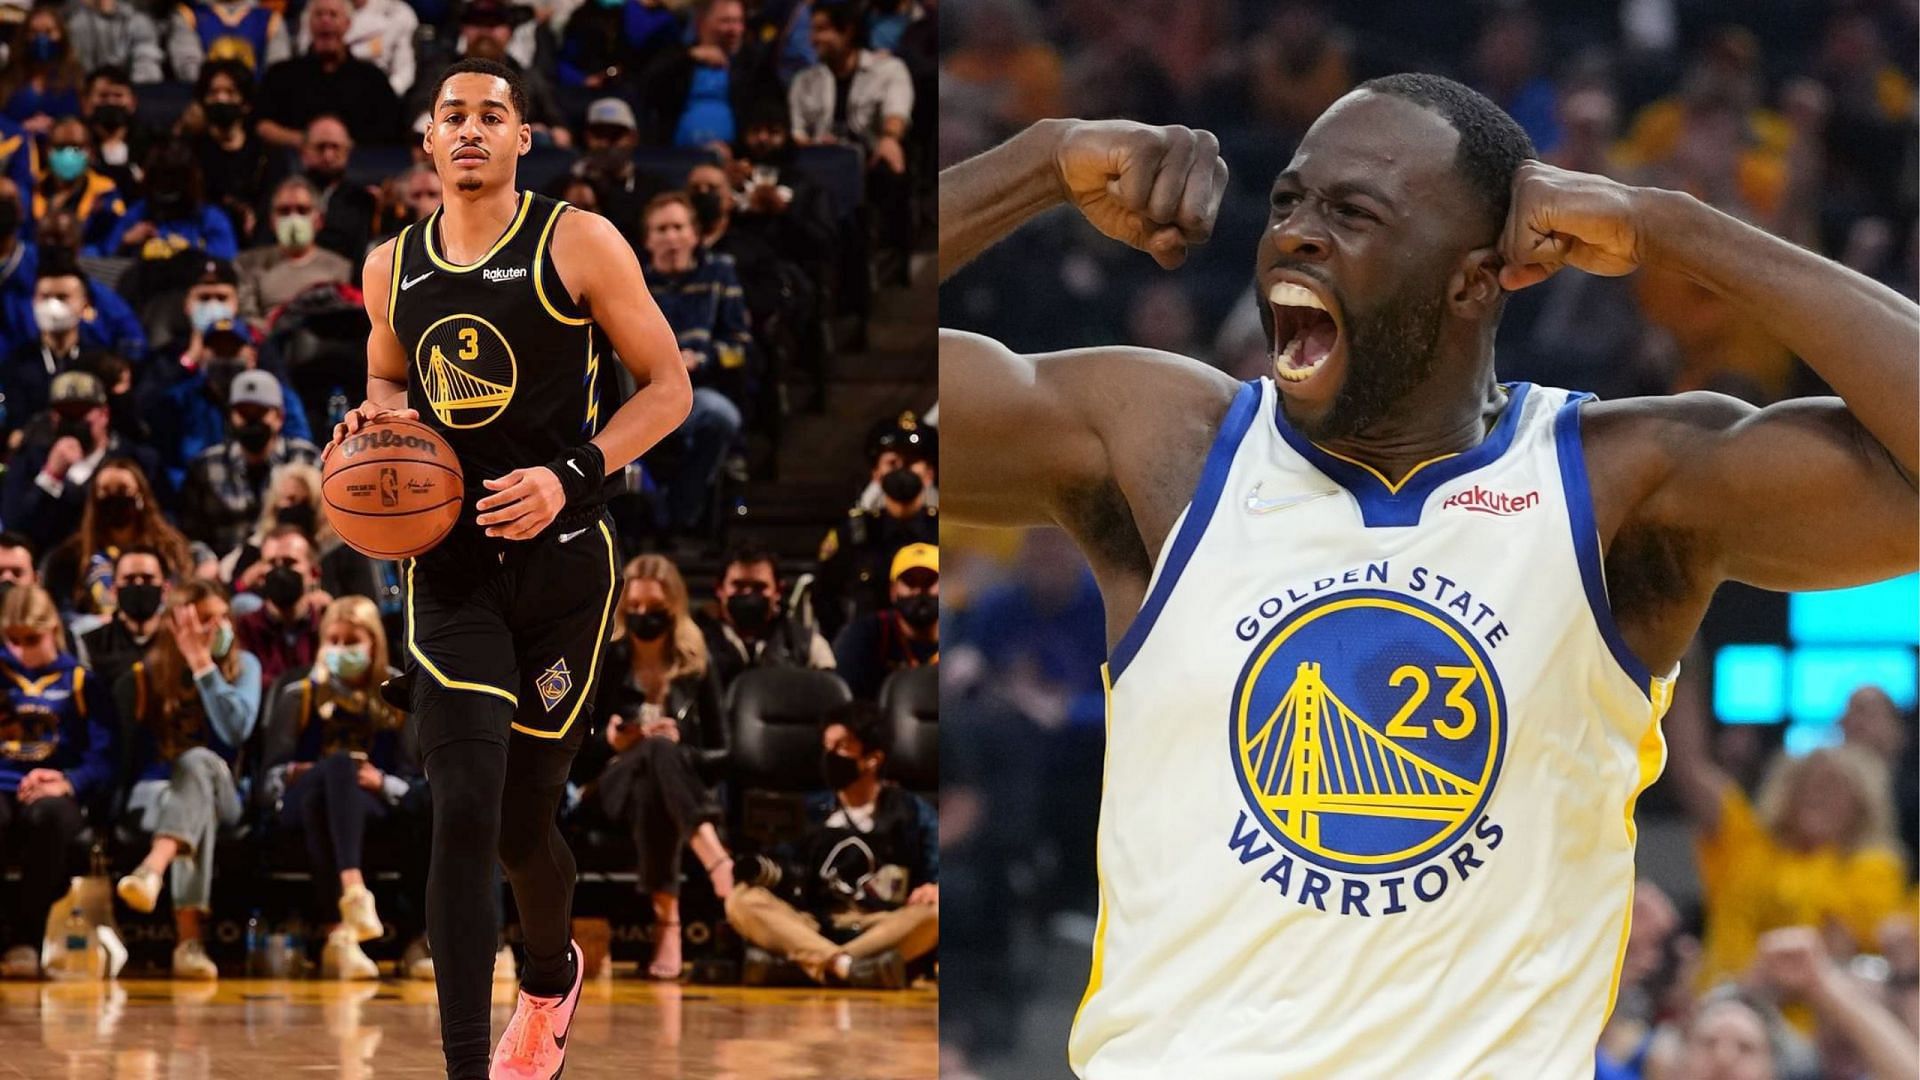 &quot;So mad Draymond ain&rsquo;t playing&quot;: Fans disappointed as no Draymond Green drama spices up Joran Poole